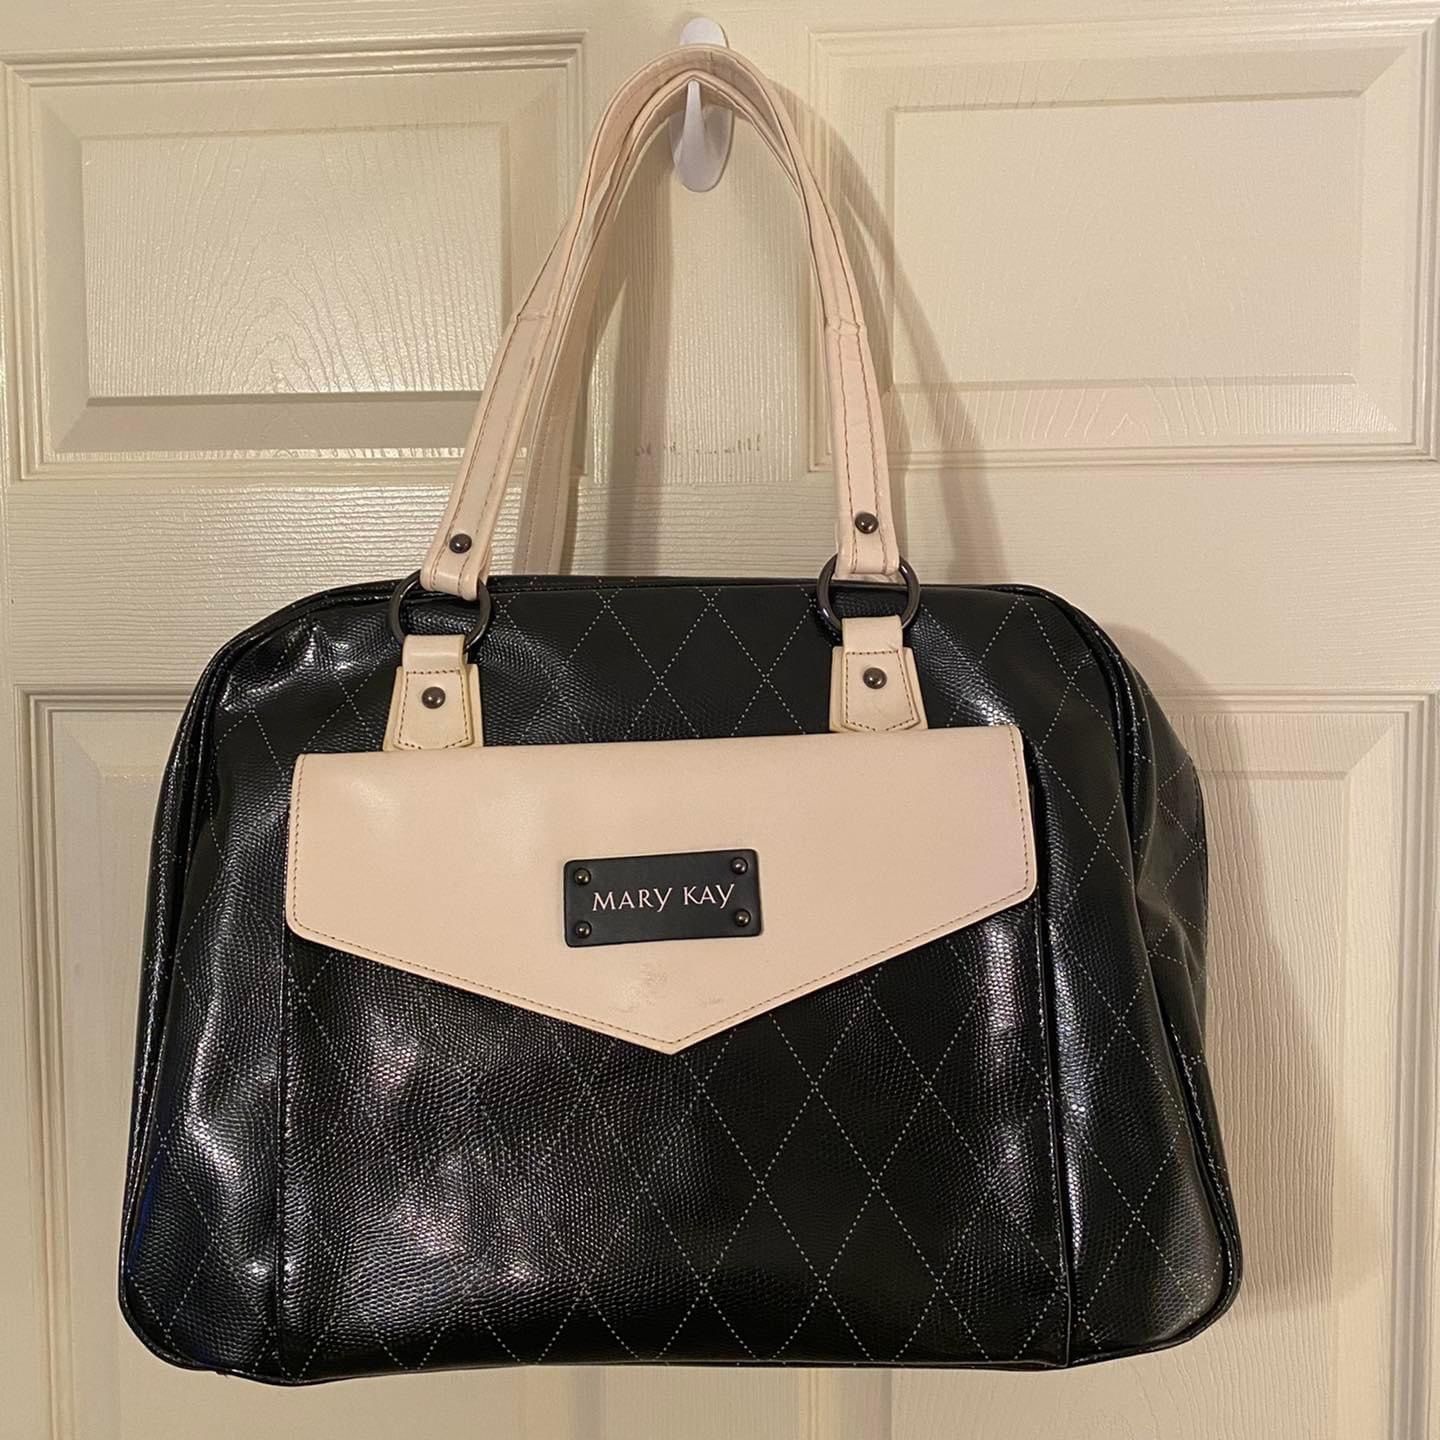 Standard Mary Kay Bag With Insert